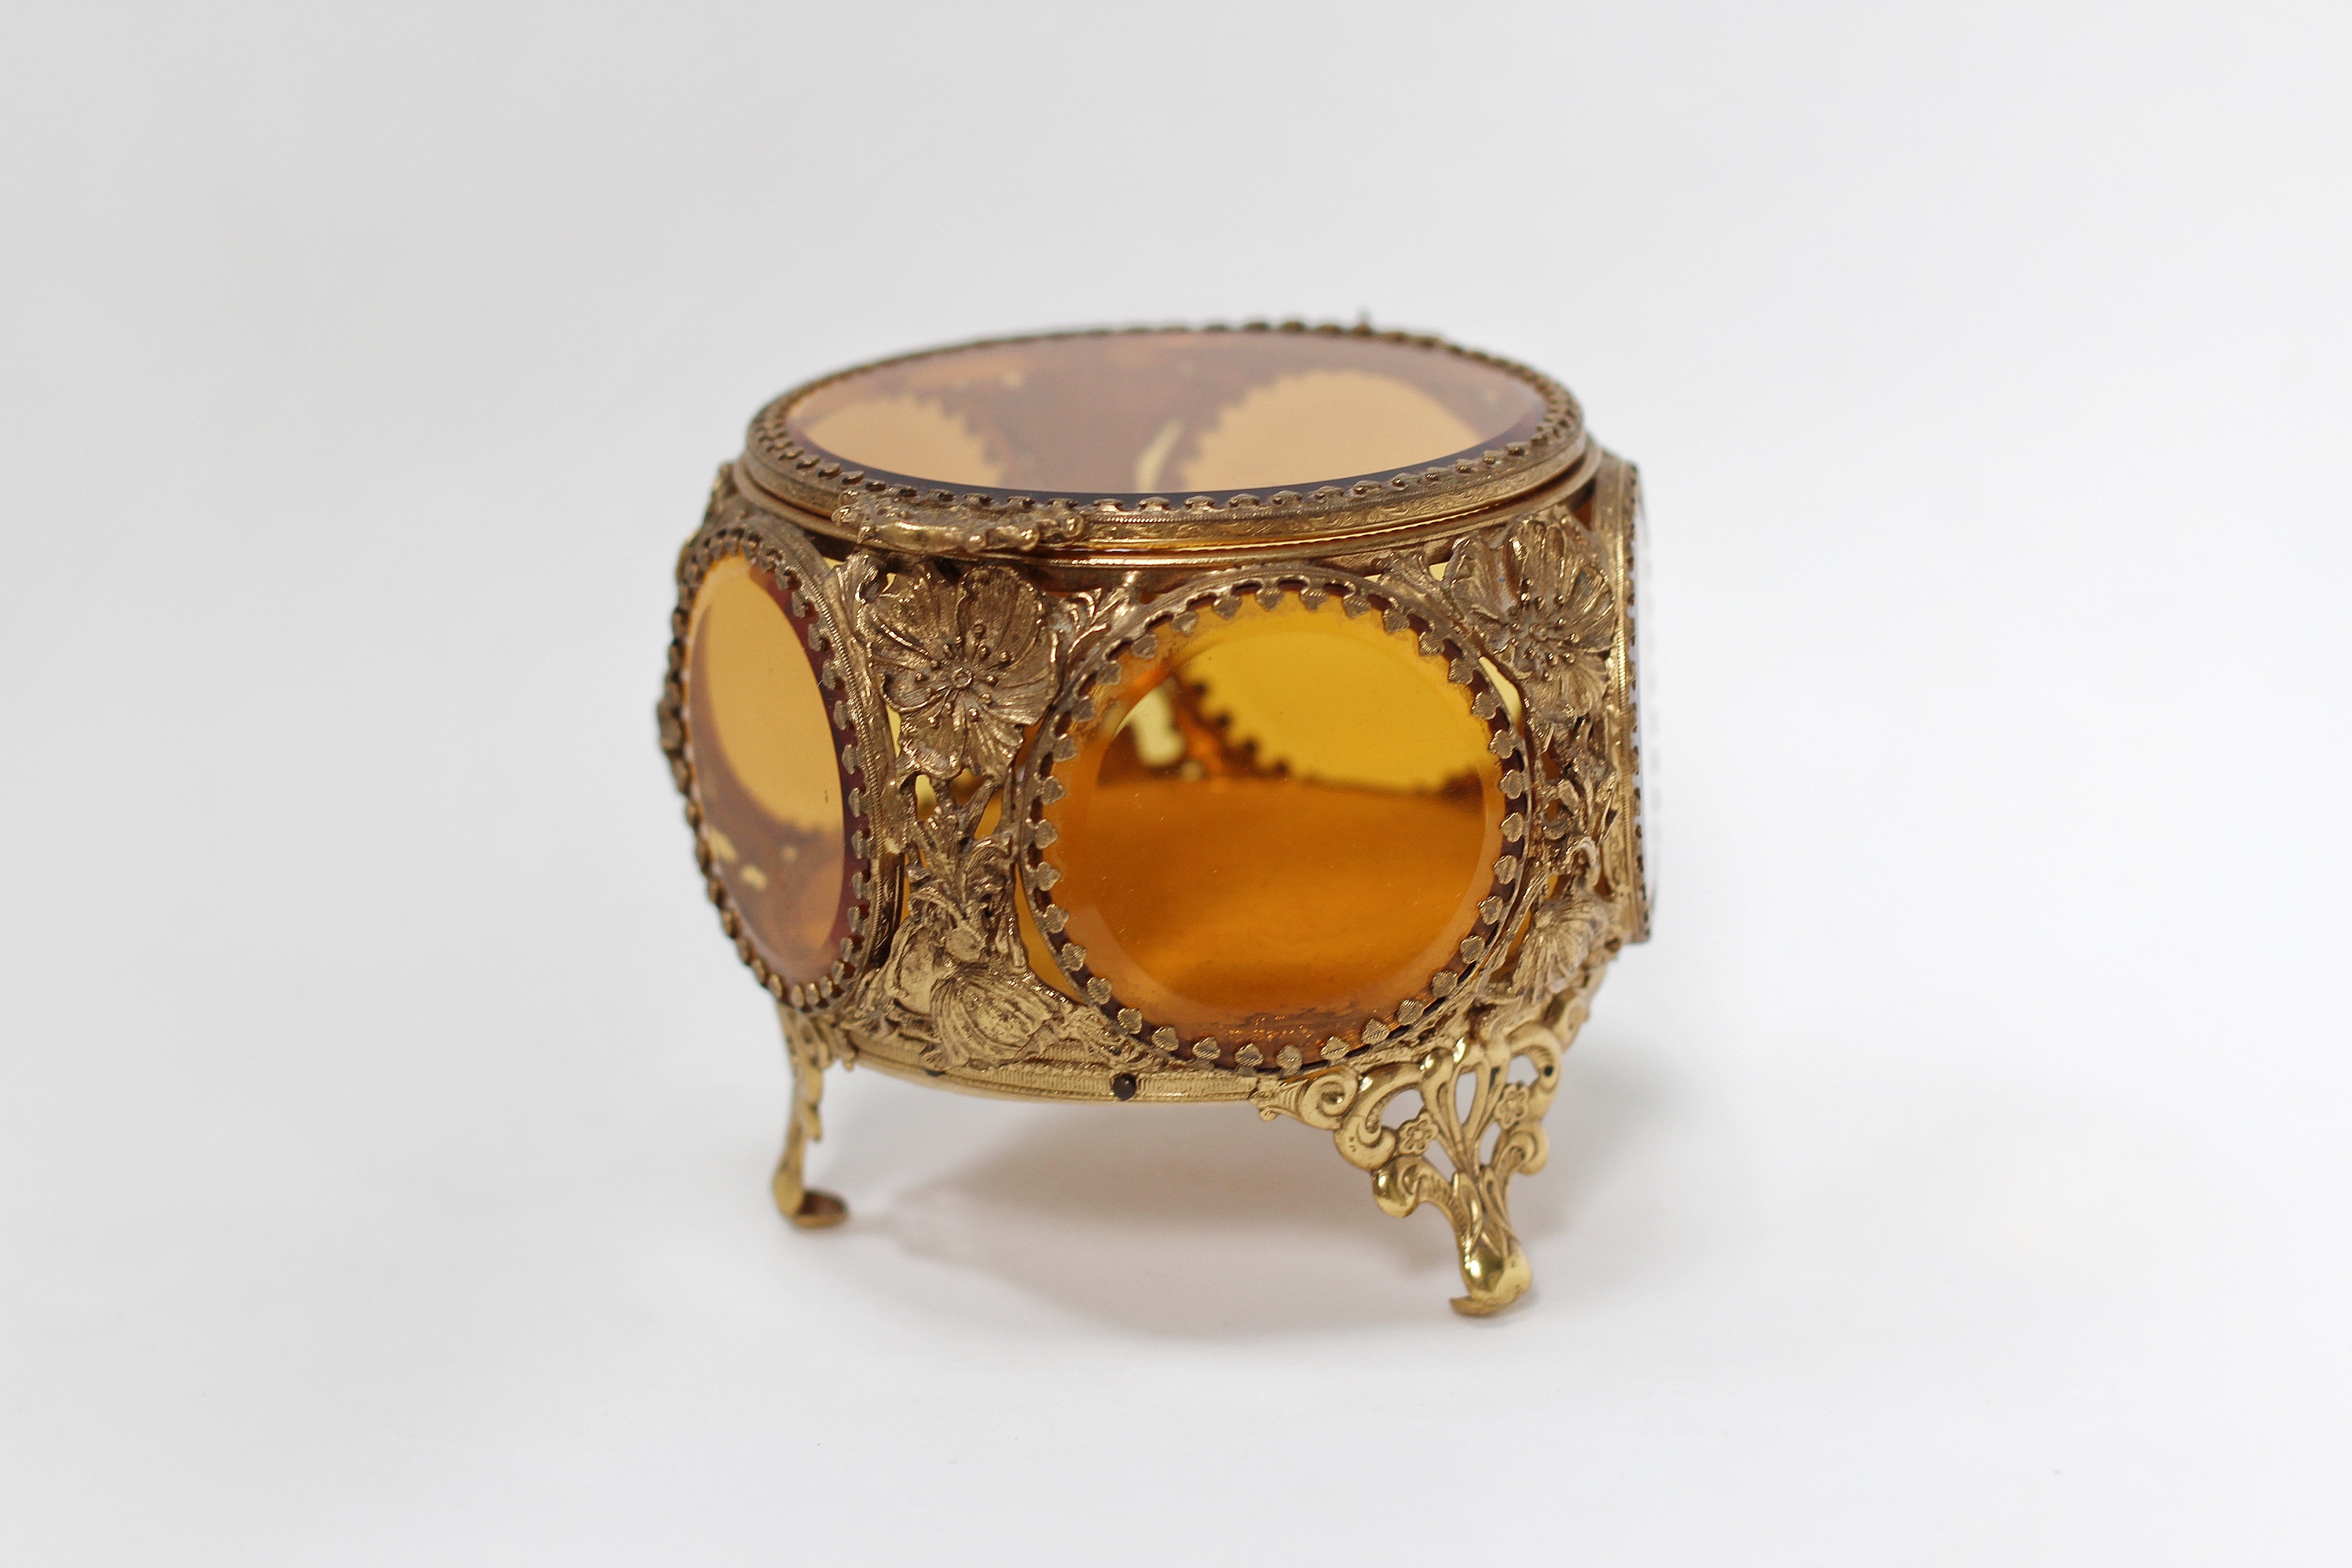 Antique Floral Filigree Amber Tinted Glass Jewelry Box